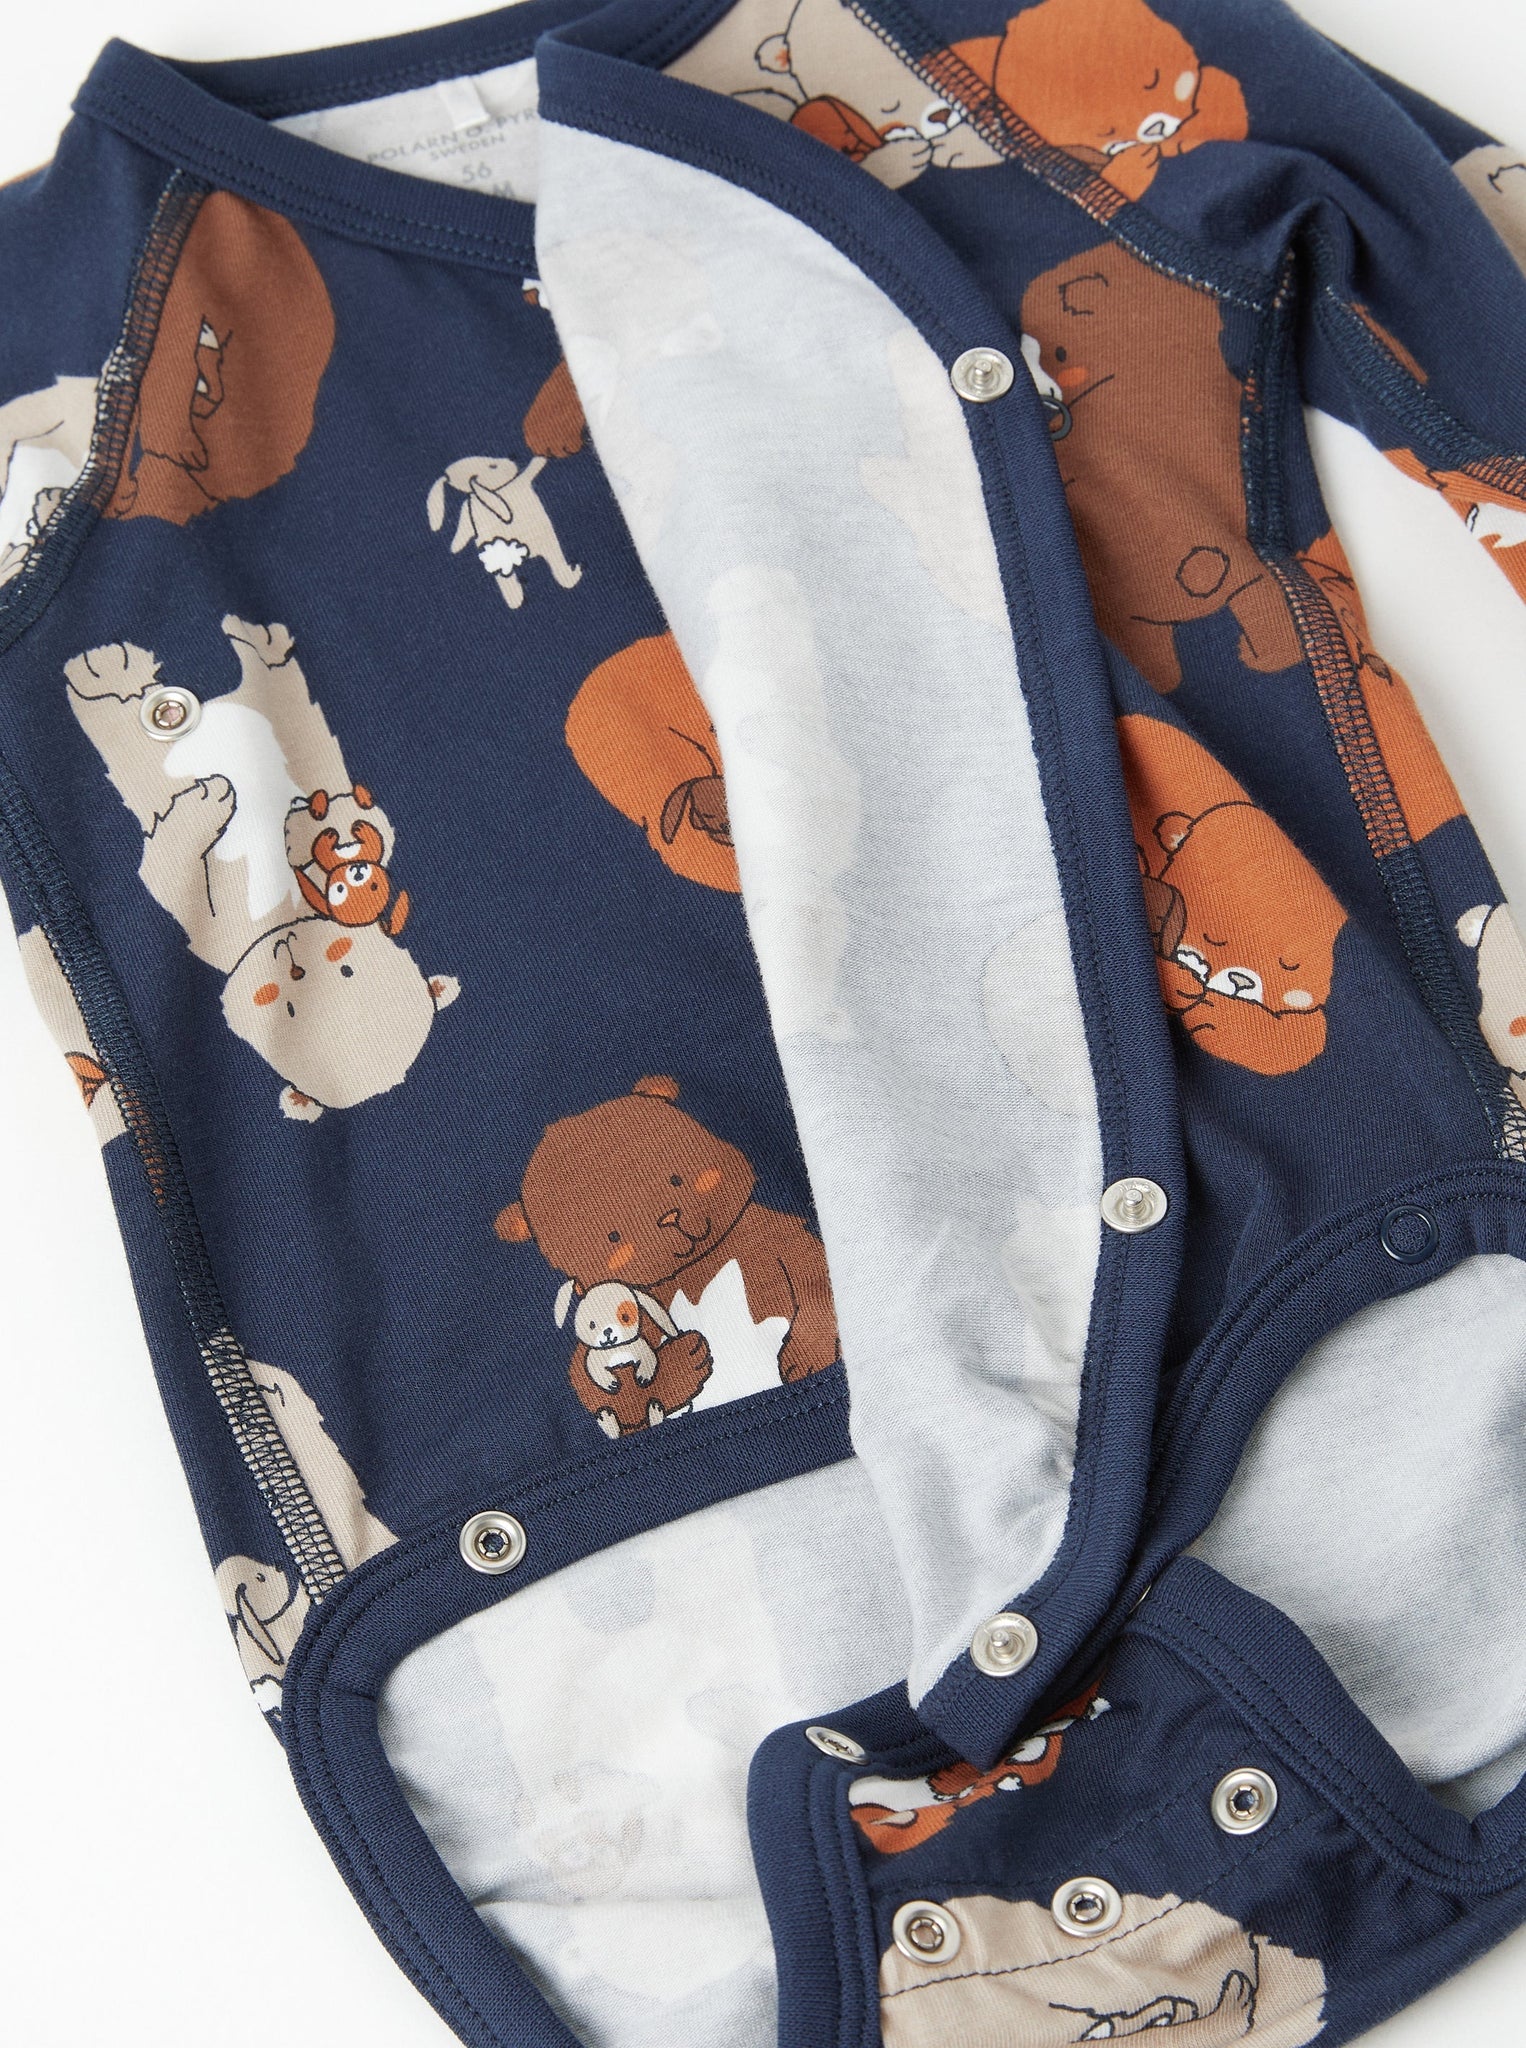 Sleepy Bear Print Wraparound Babygrow from the Polarn O. Pyret baby collection. The best ethical baby clothes